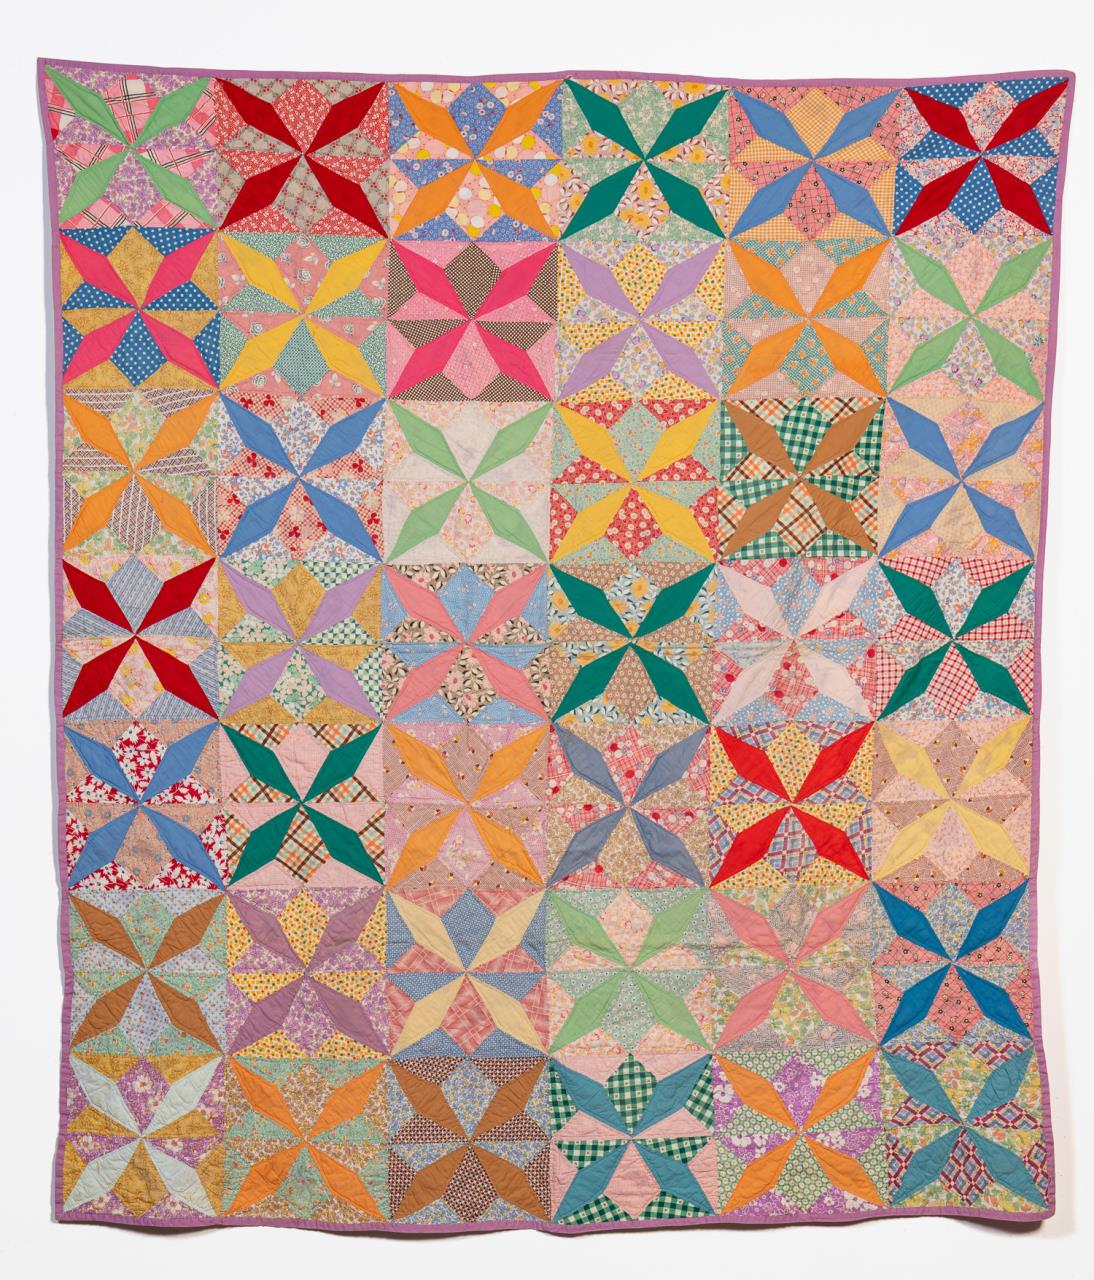 HAND QUILTED COTTON DIAMOND STAR 359357